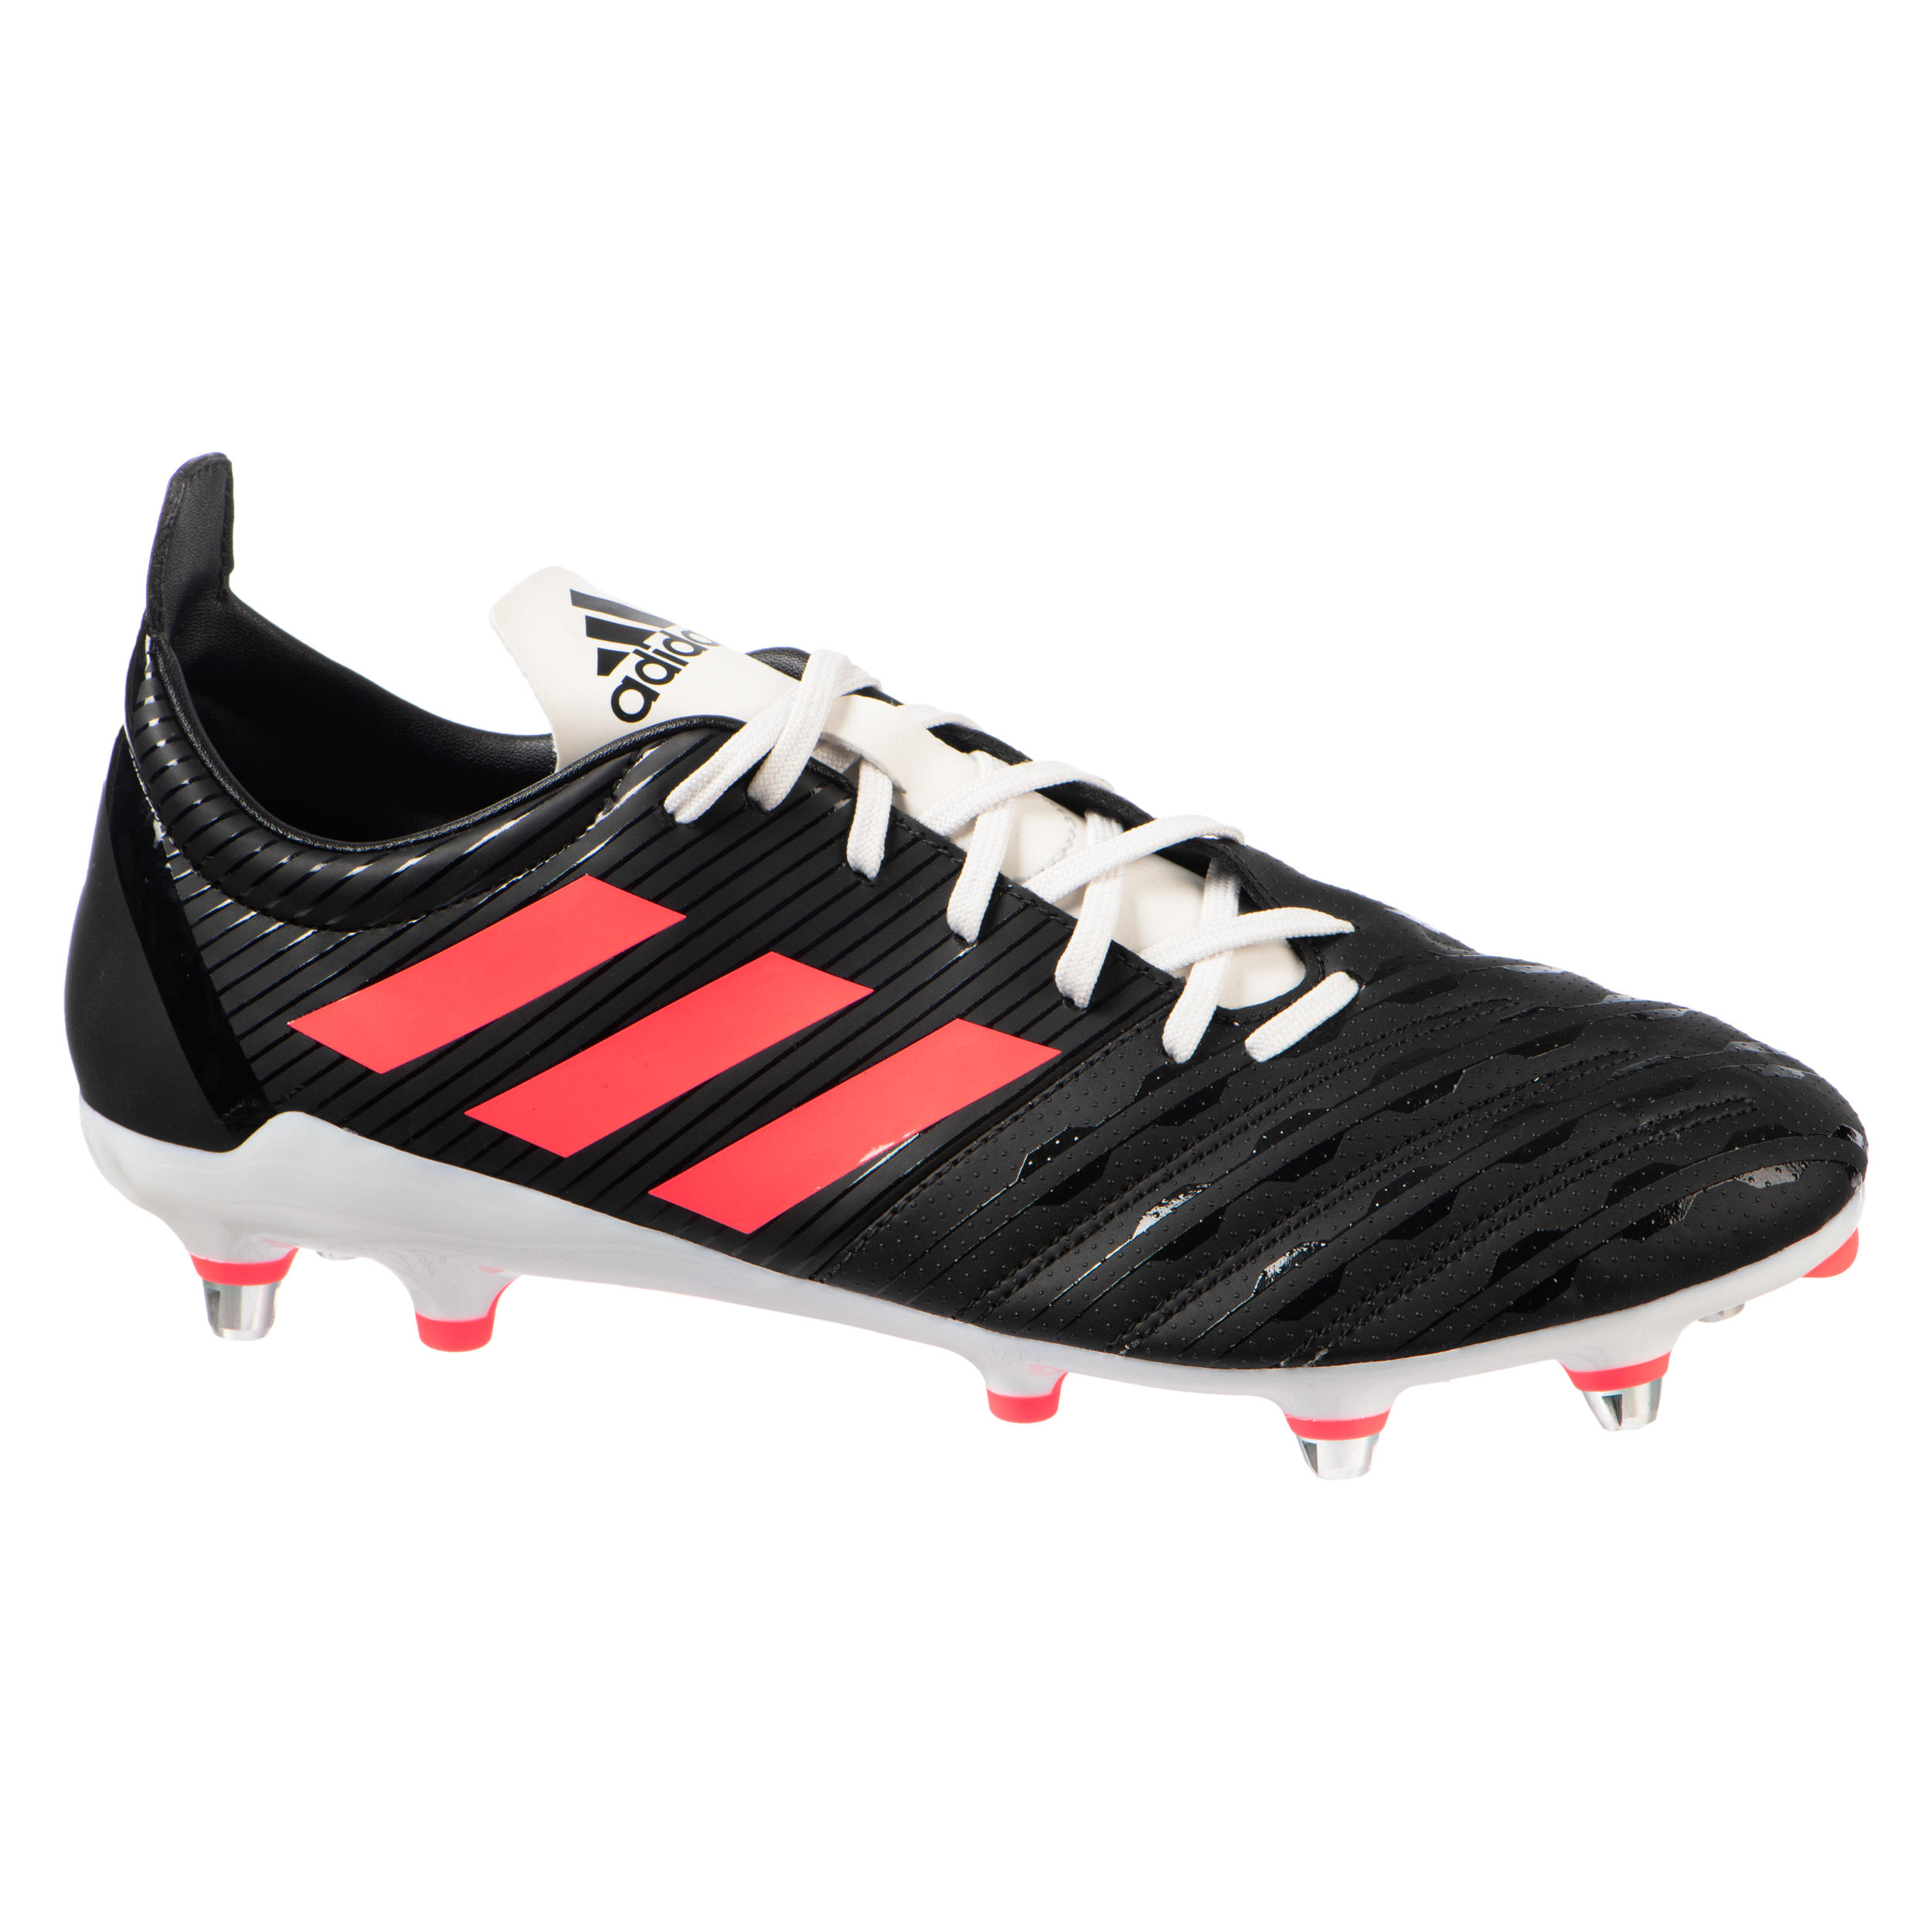 Adult Soft Pitch Screw-In Hybrid Rugby Boots Malice SG - Black 1/7